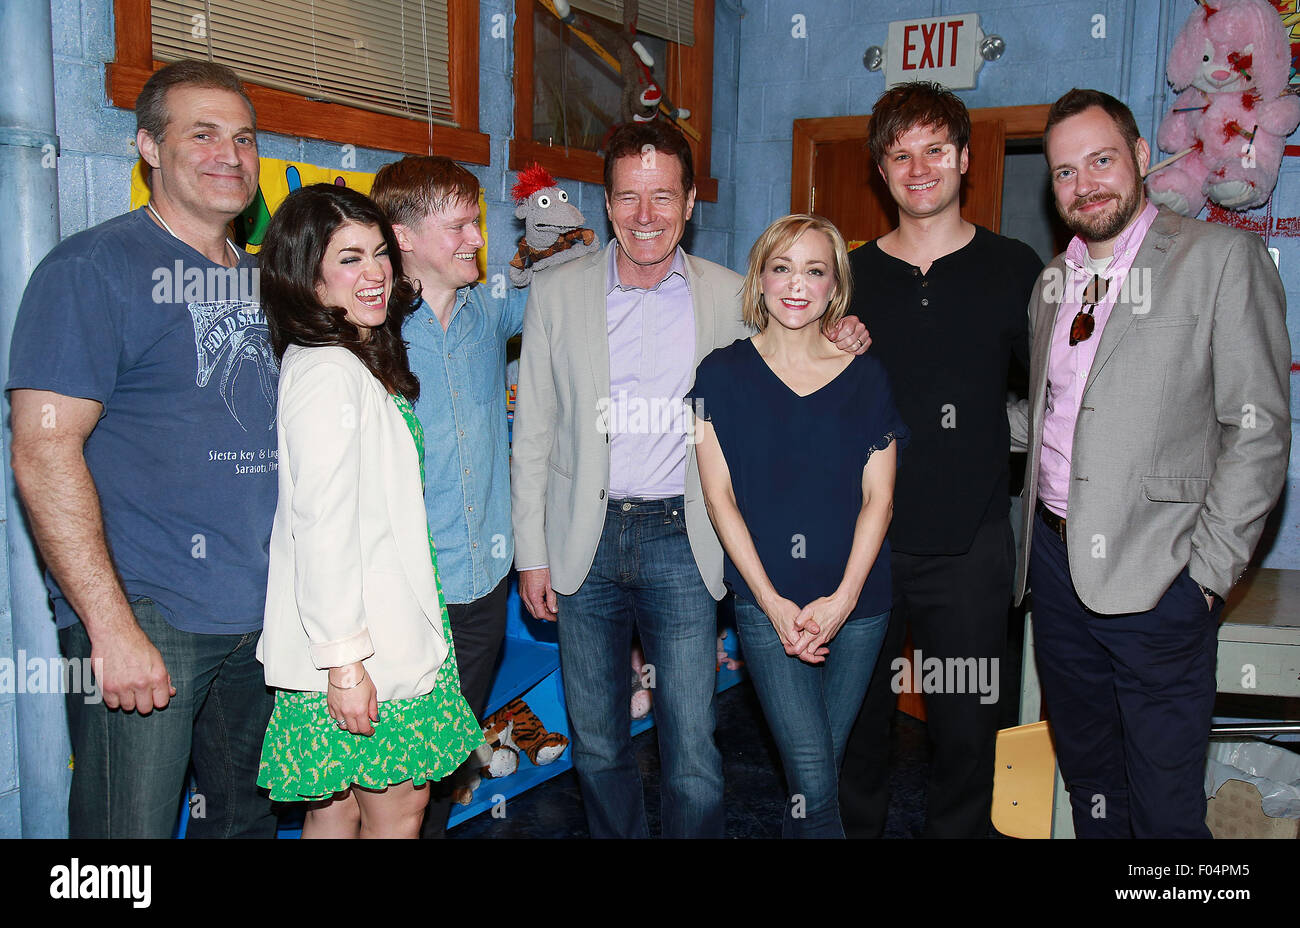 Bryan Cranston visits the cast of the Broadway play 'Hand To God' backstage at the Booth Theatre  Featuring: Marc Kudisch, Sarah Stiles, Steven Boyer, Tyrone the demonic puppet, Bryan Cranston, Geneva Carr, Michael Oberholtzer, Moritz von Stuelpnagel Where: New York City, New York, United States When: 06 Jun 2015 Stock Photo